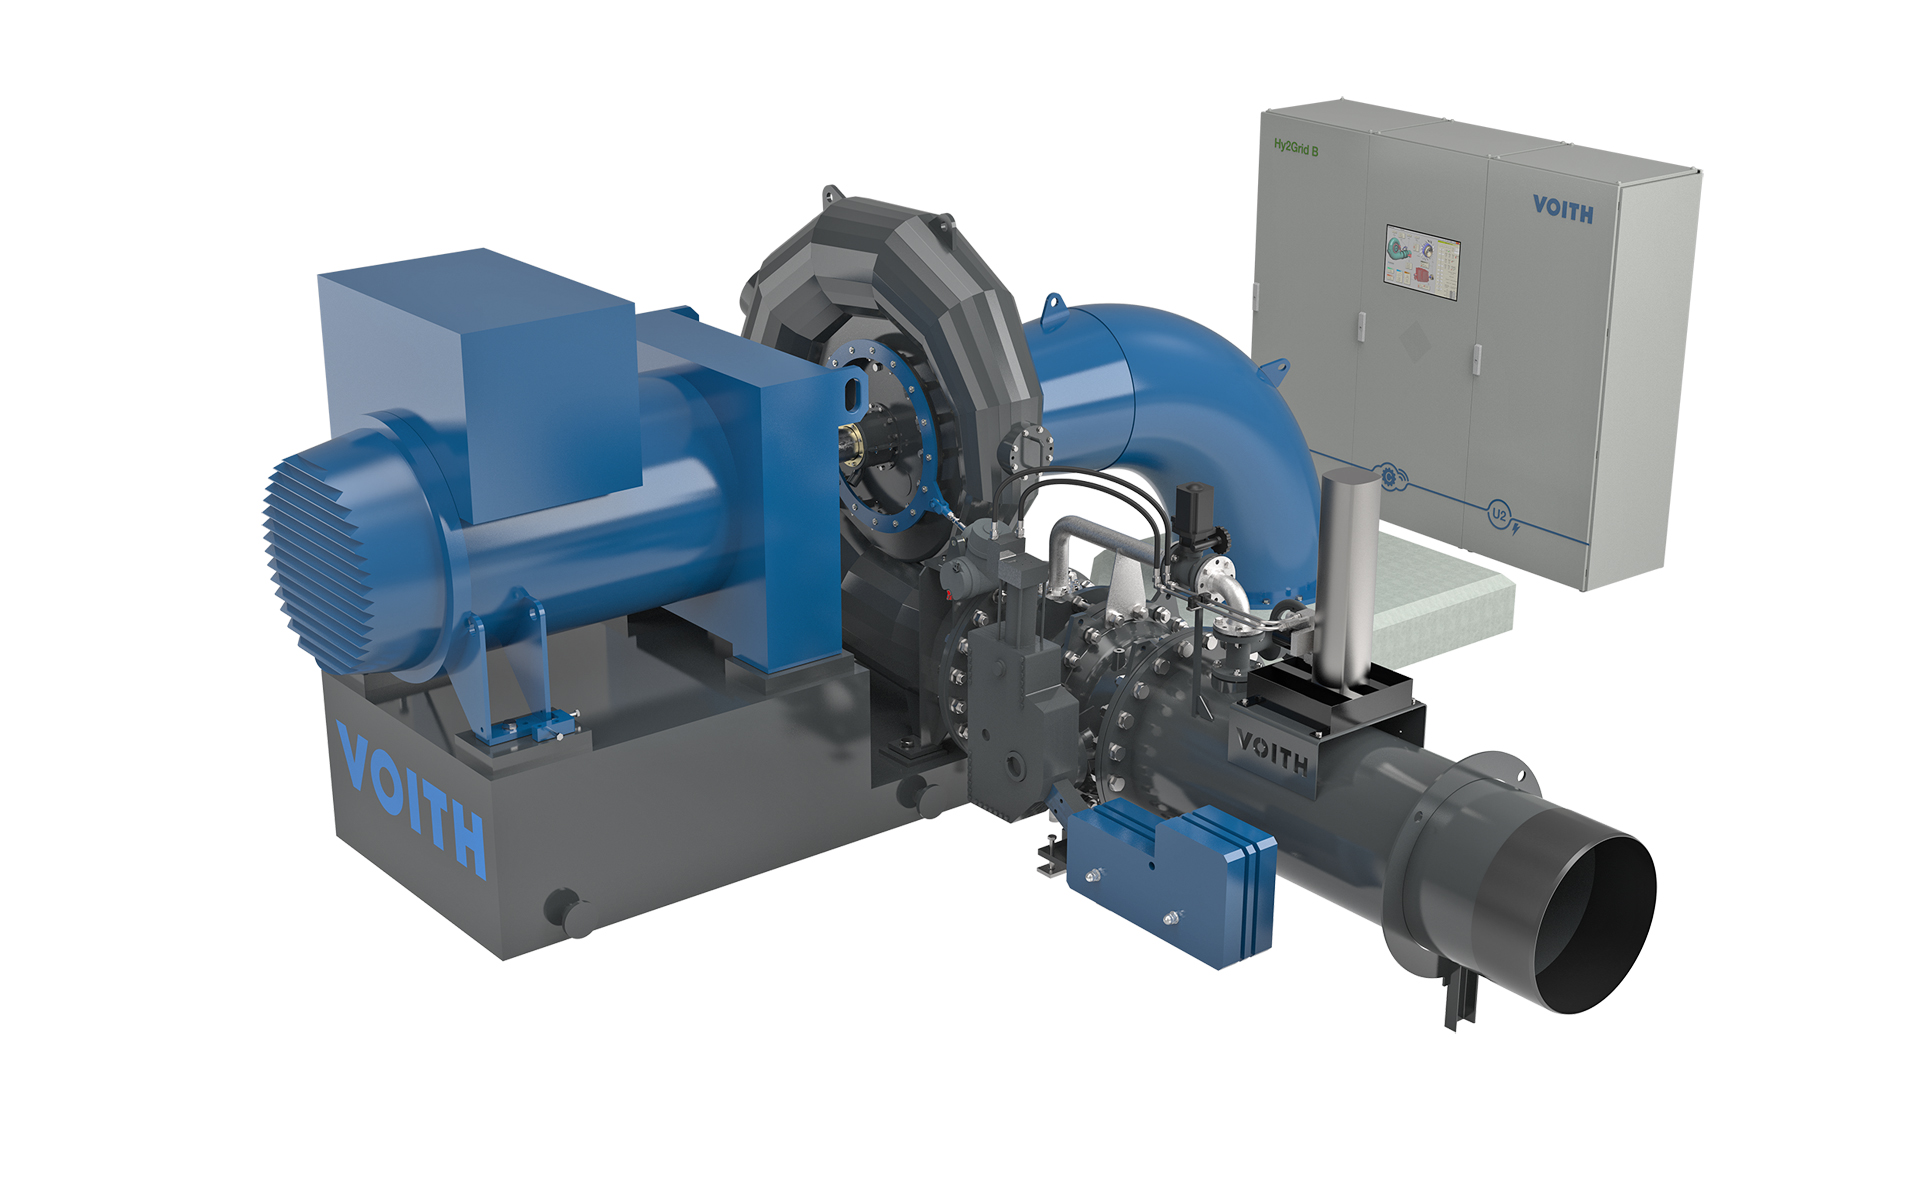 Voith Hydro’s new M-Line